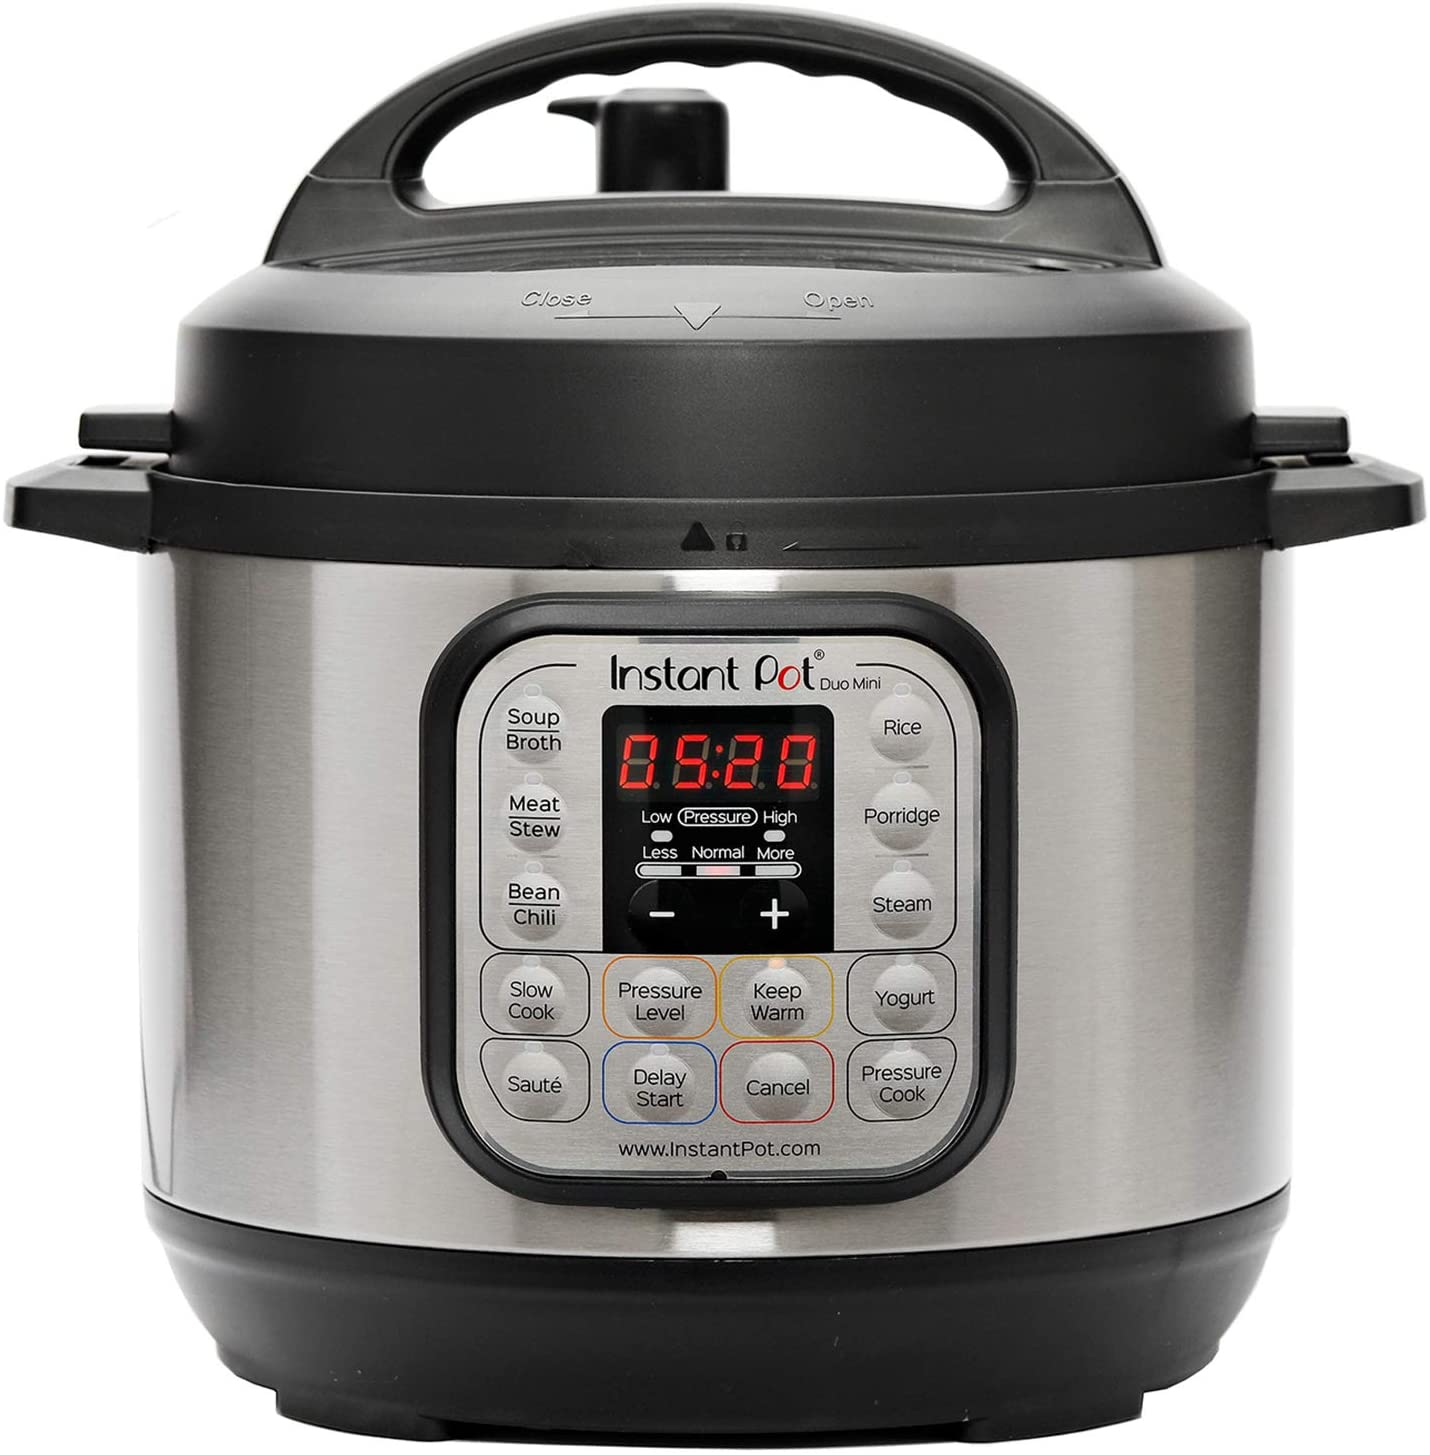  Instant Pot Duo 7-in-1 Electric Pressure Cooker, Sterilizer,  Slow Cooker, Rice Cooker, Steamer, Saute, Yogurt Maker, and Warmer, 8 Quart,  14 One-Touch Programs & 8 Quart Glass Lid: Home & Kitchen